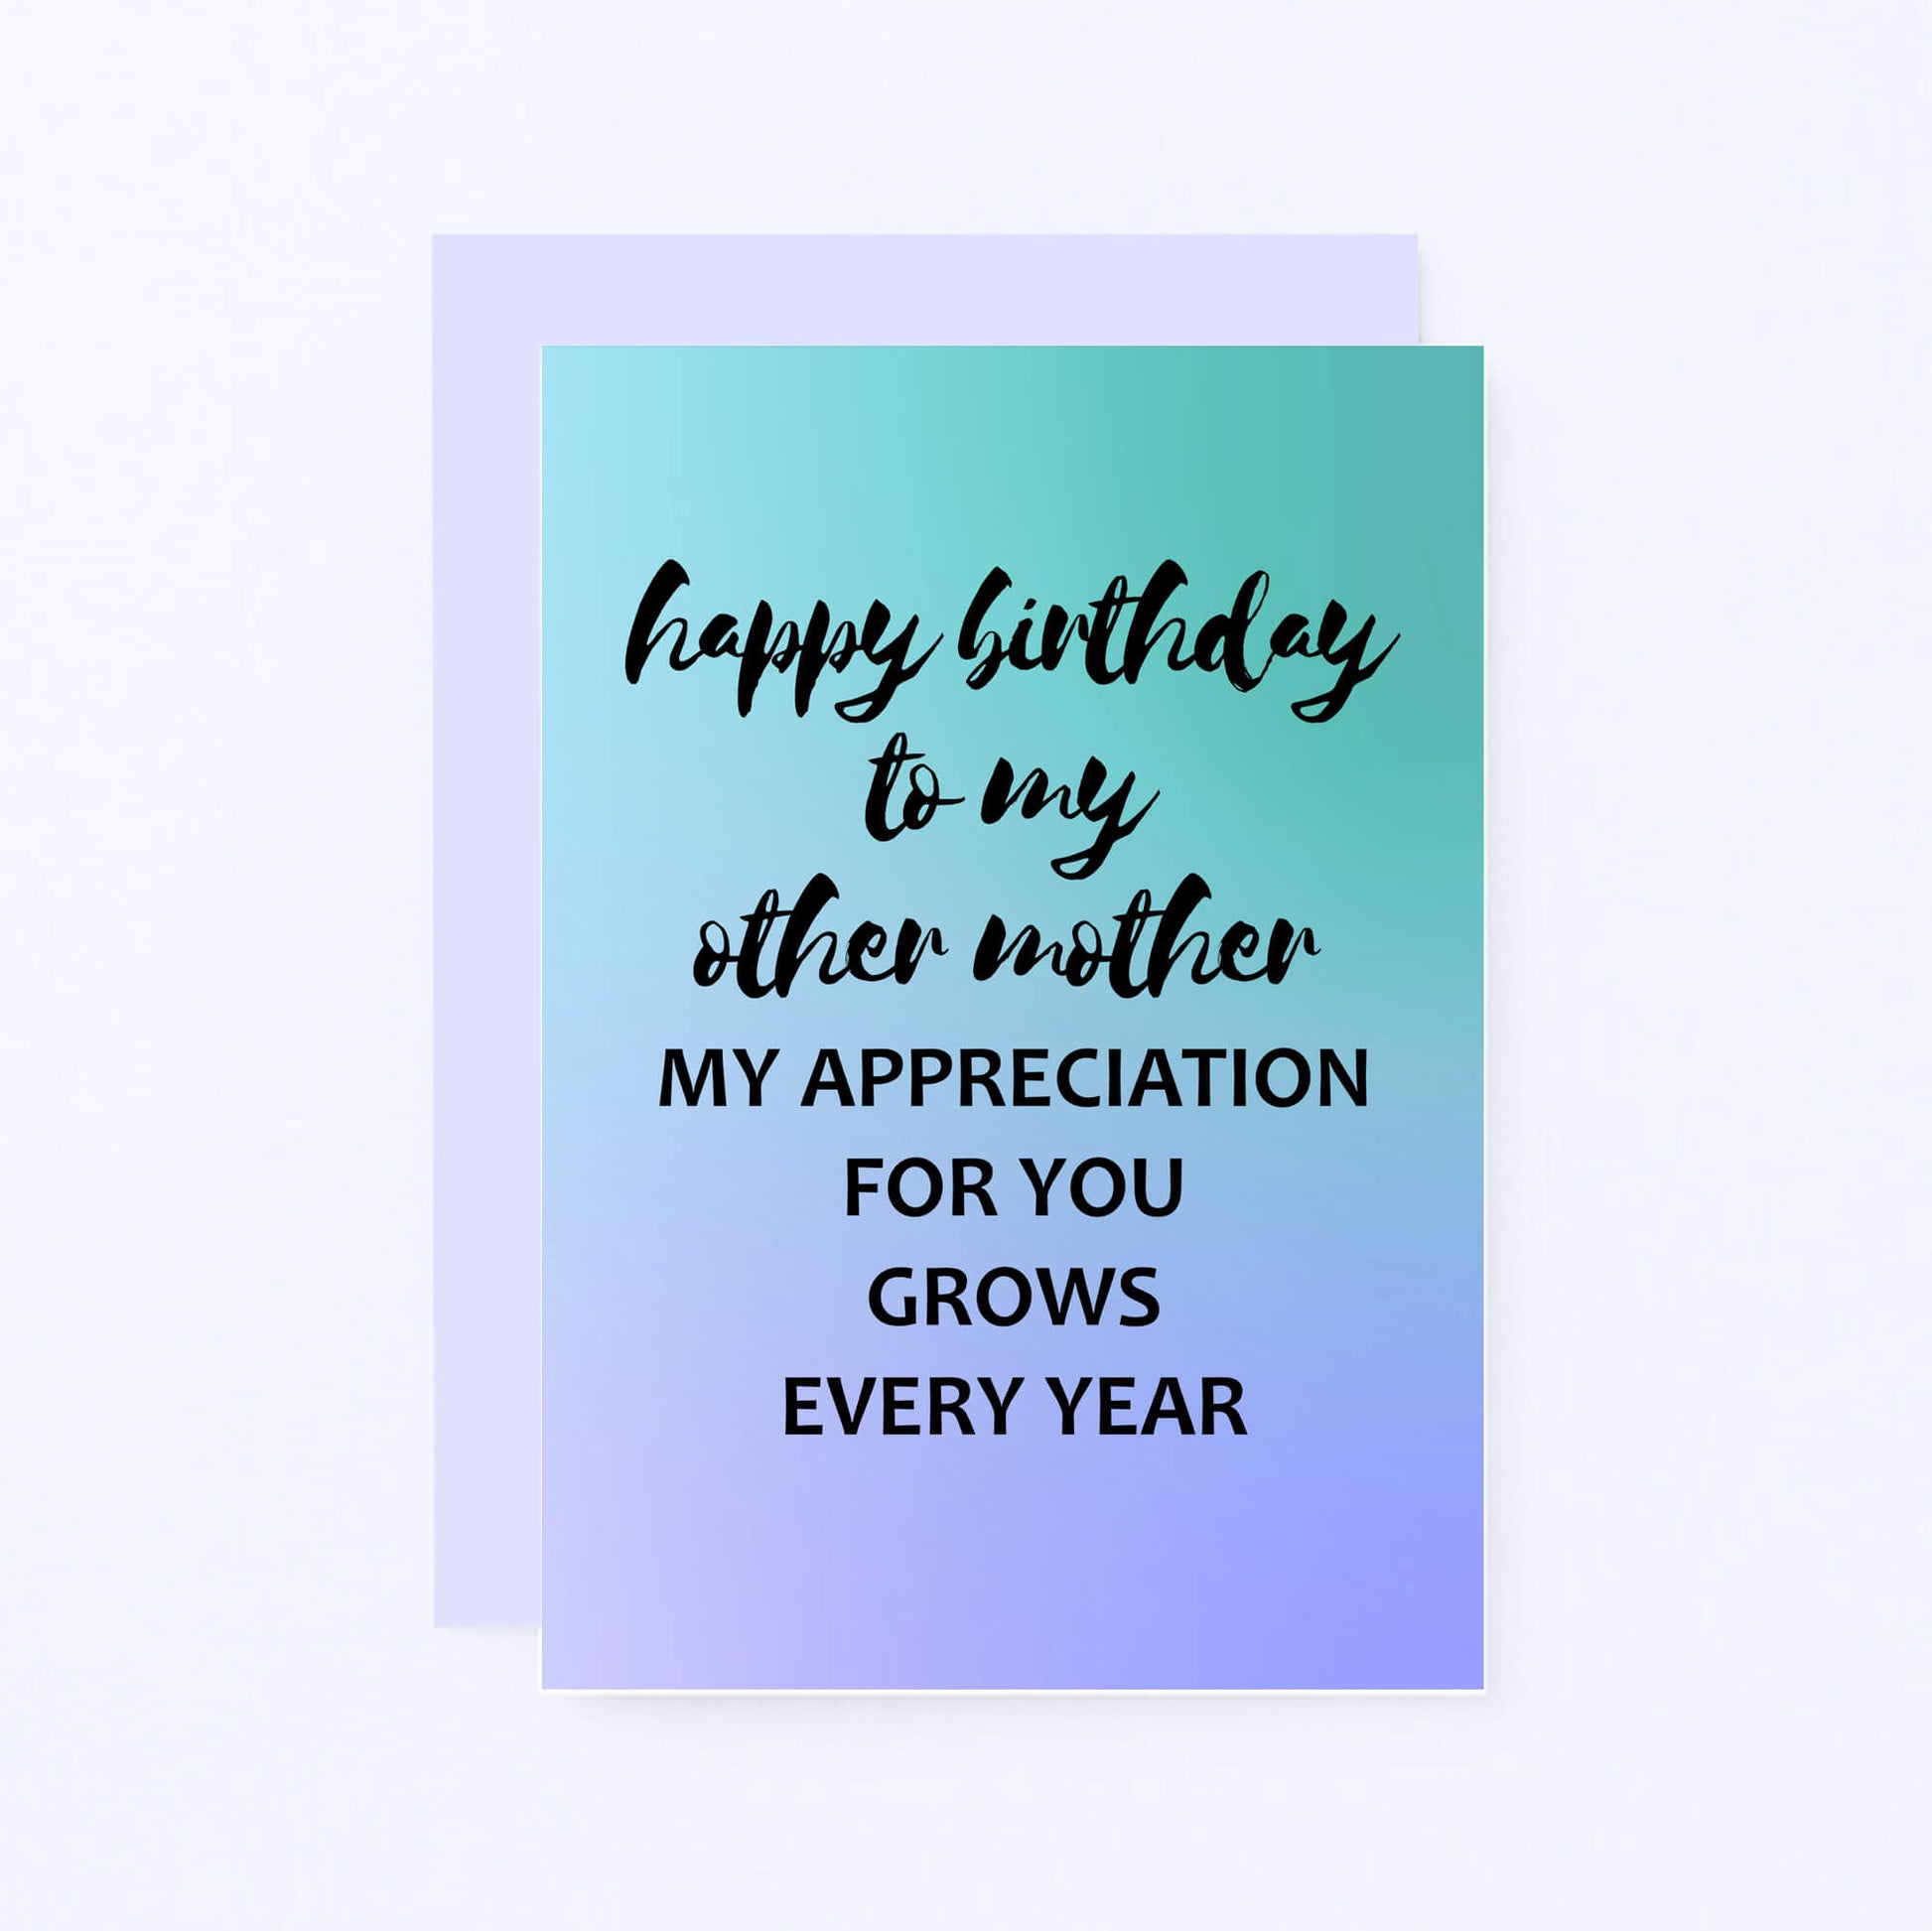 Other Mother Birthday Card by SixElevenCreations. Reads Happy birthday to my other mother. My appreciation for you grows every year. Product Code SE3032A6